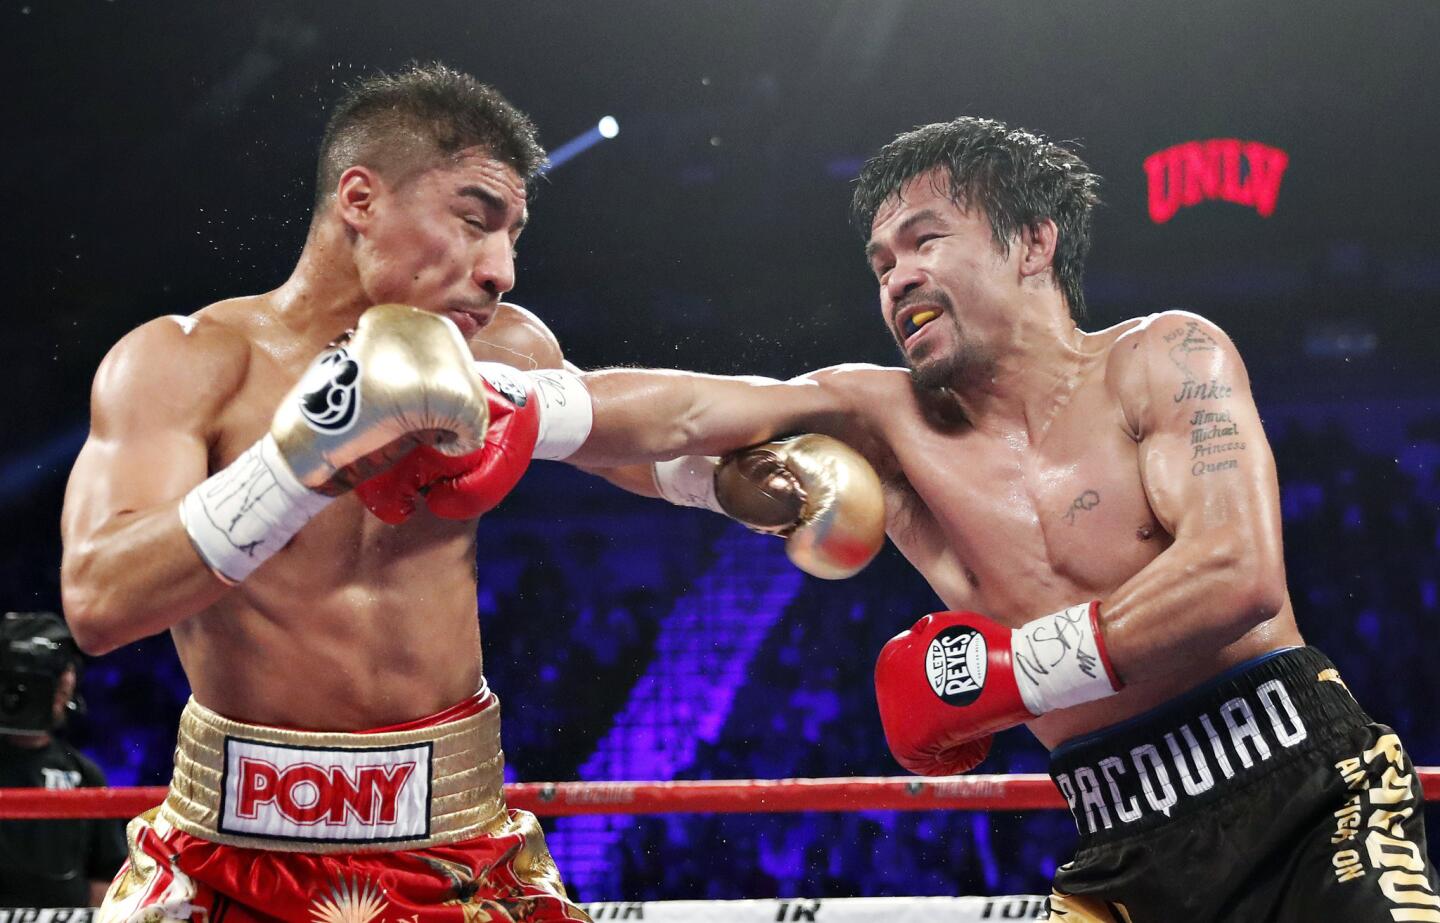 Manny Pacquiao connects to the face of Jessie Vargas during their WBO welterweight title bout in Las Vegas on Saturday night.